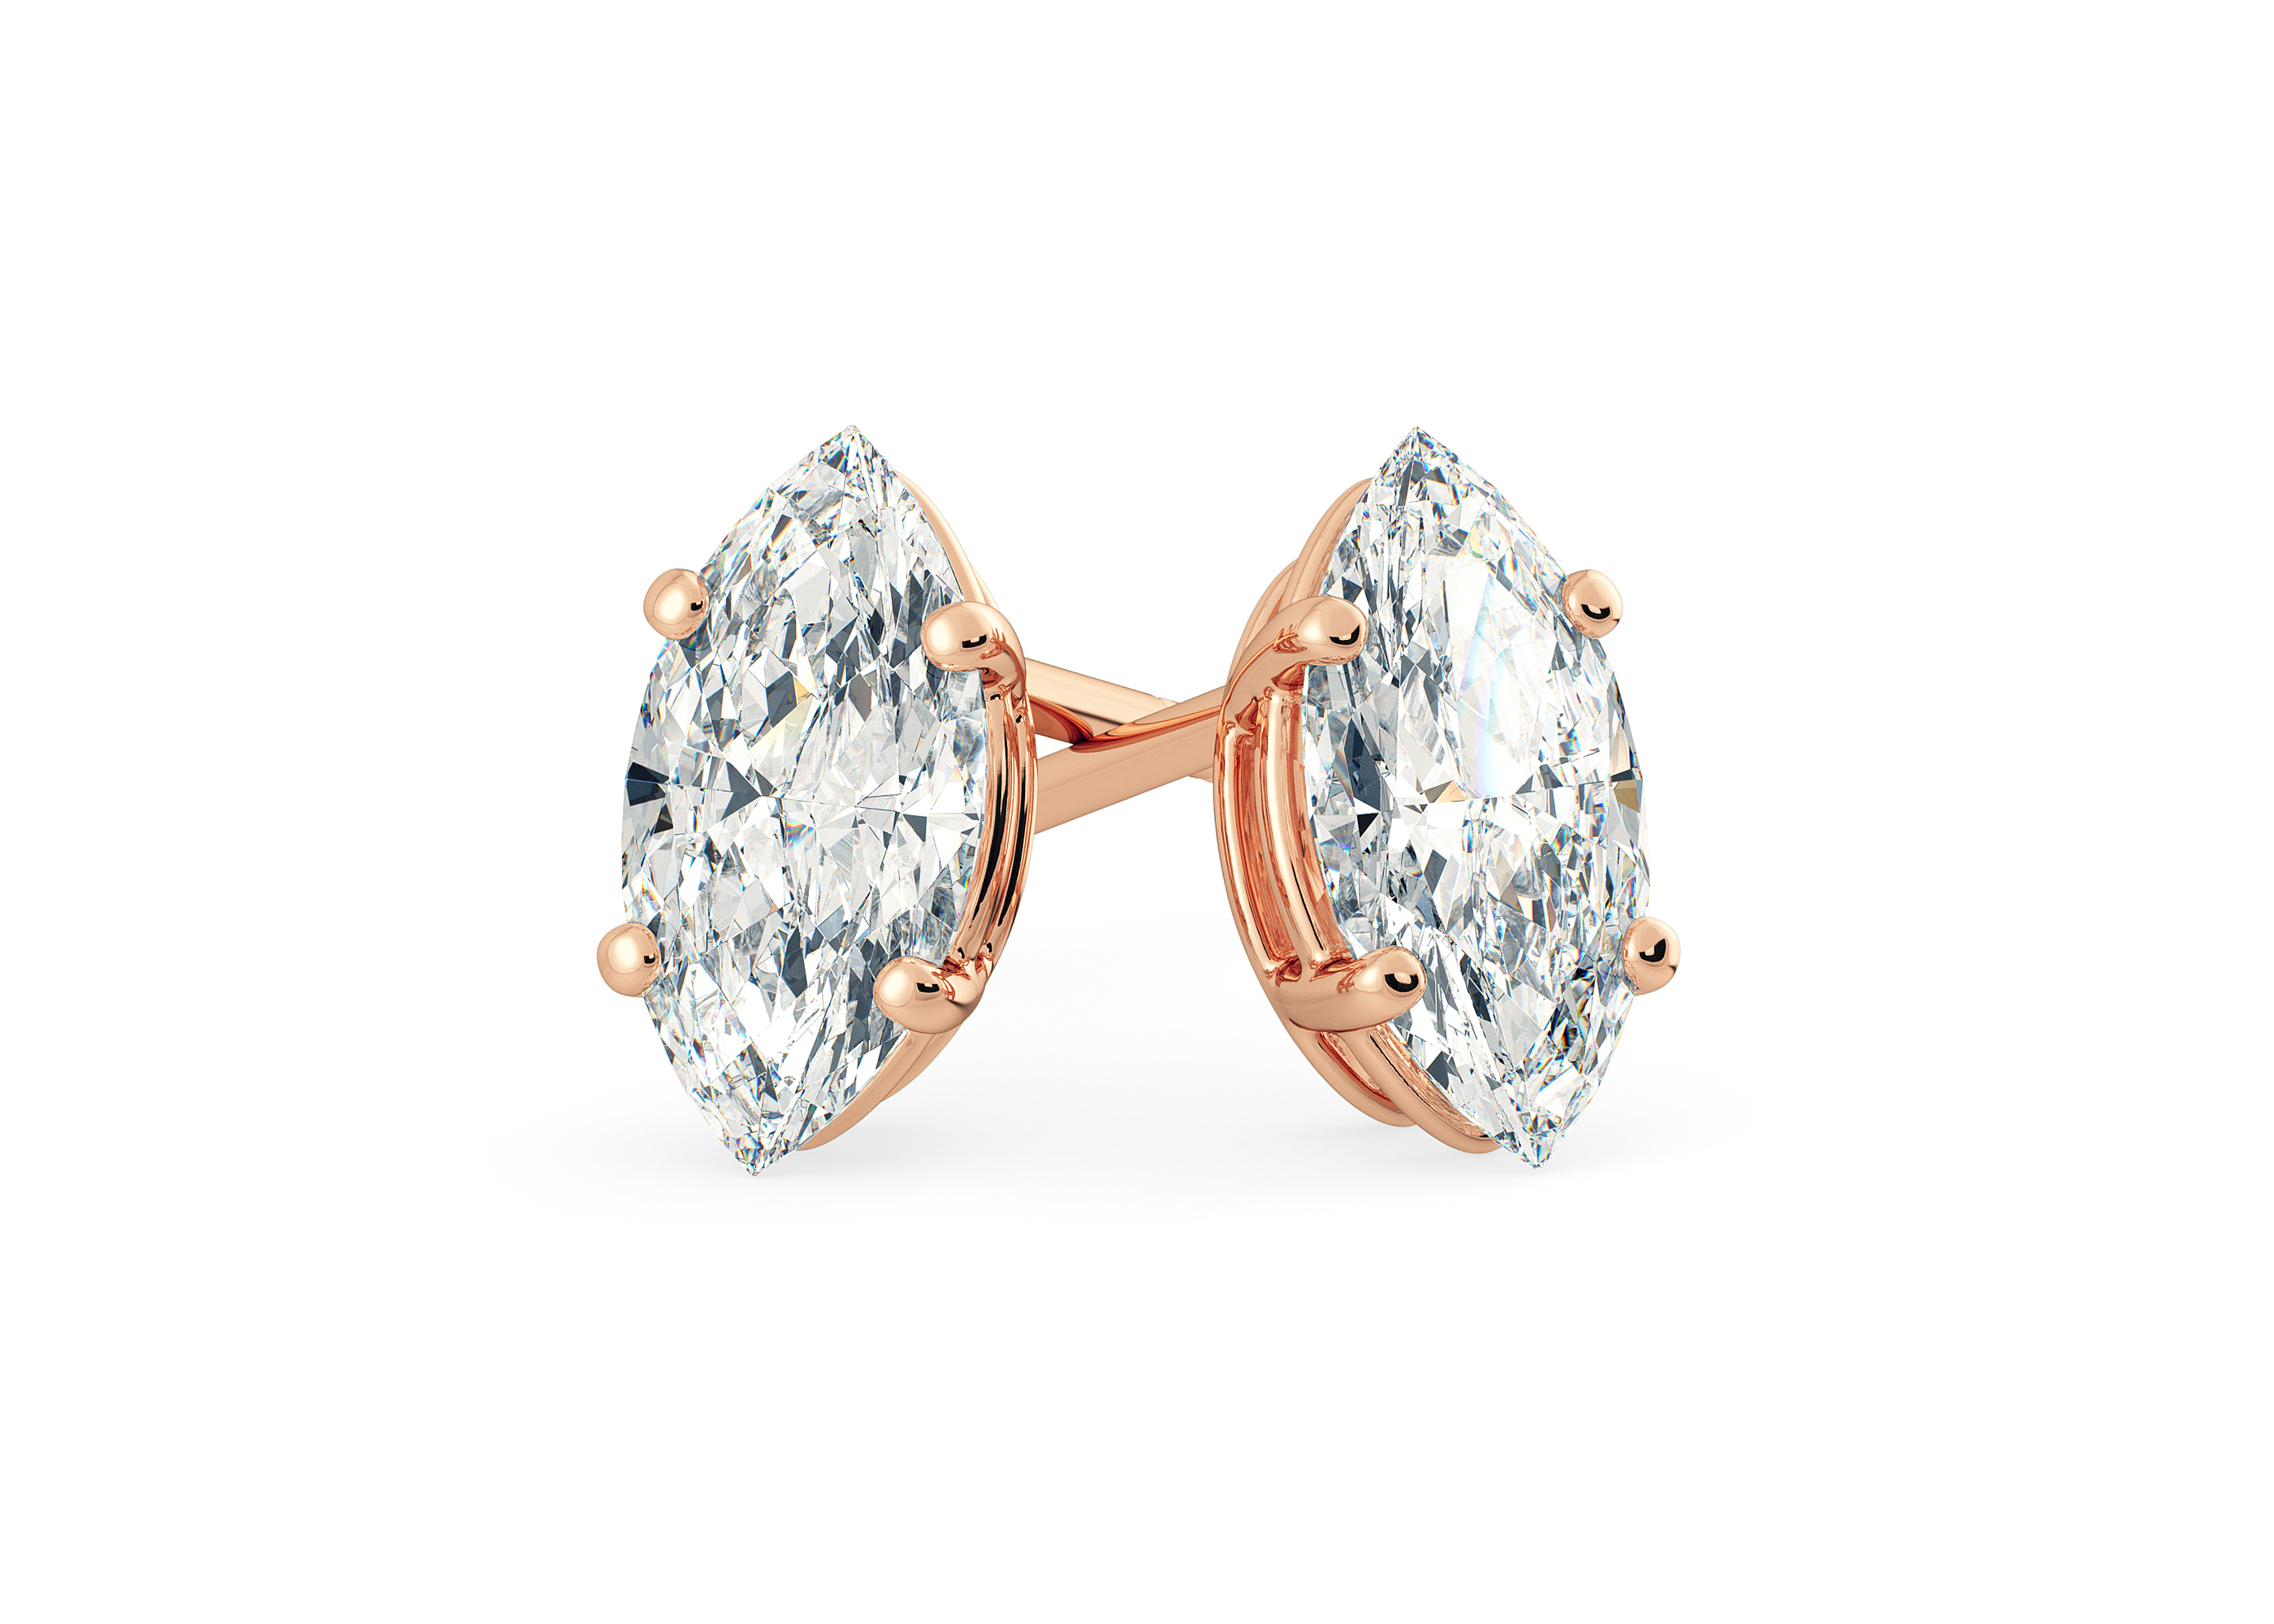 Ettore Marquise Diamond Stud Earrings in 18K Rose Gold with Screw Backs